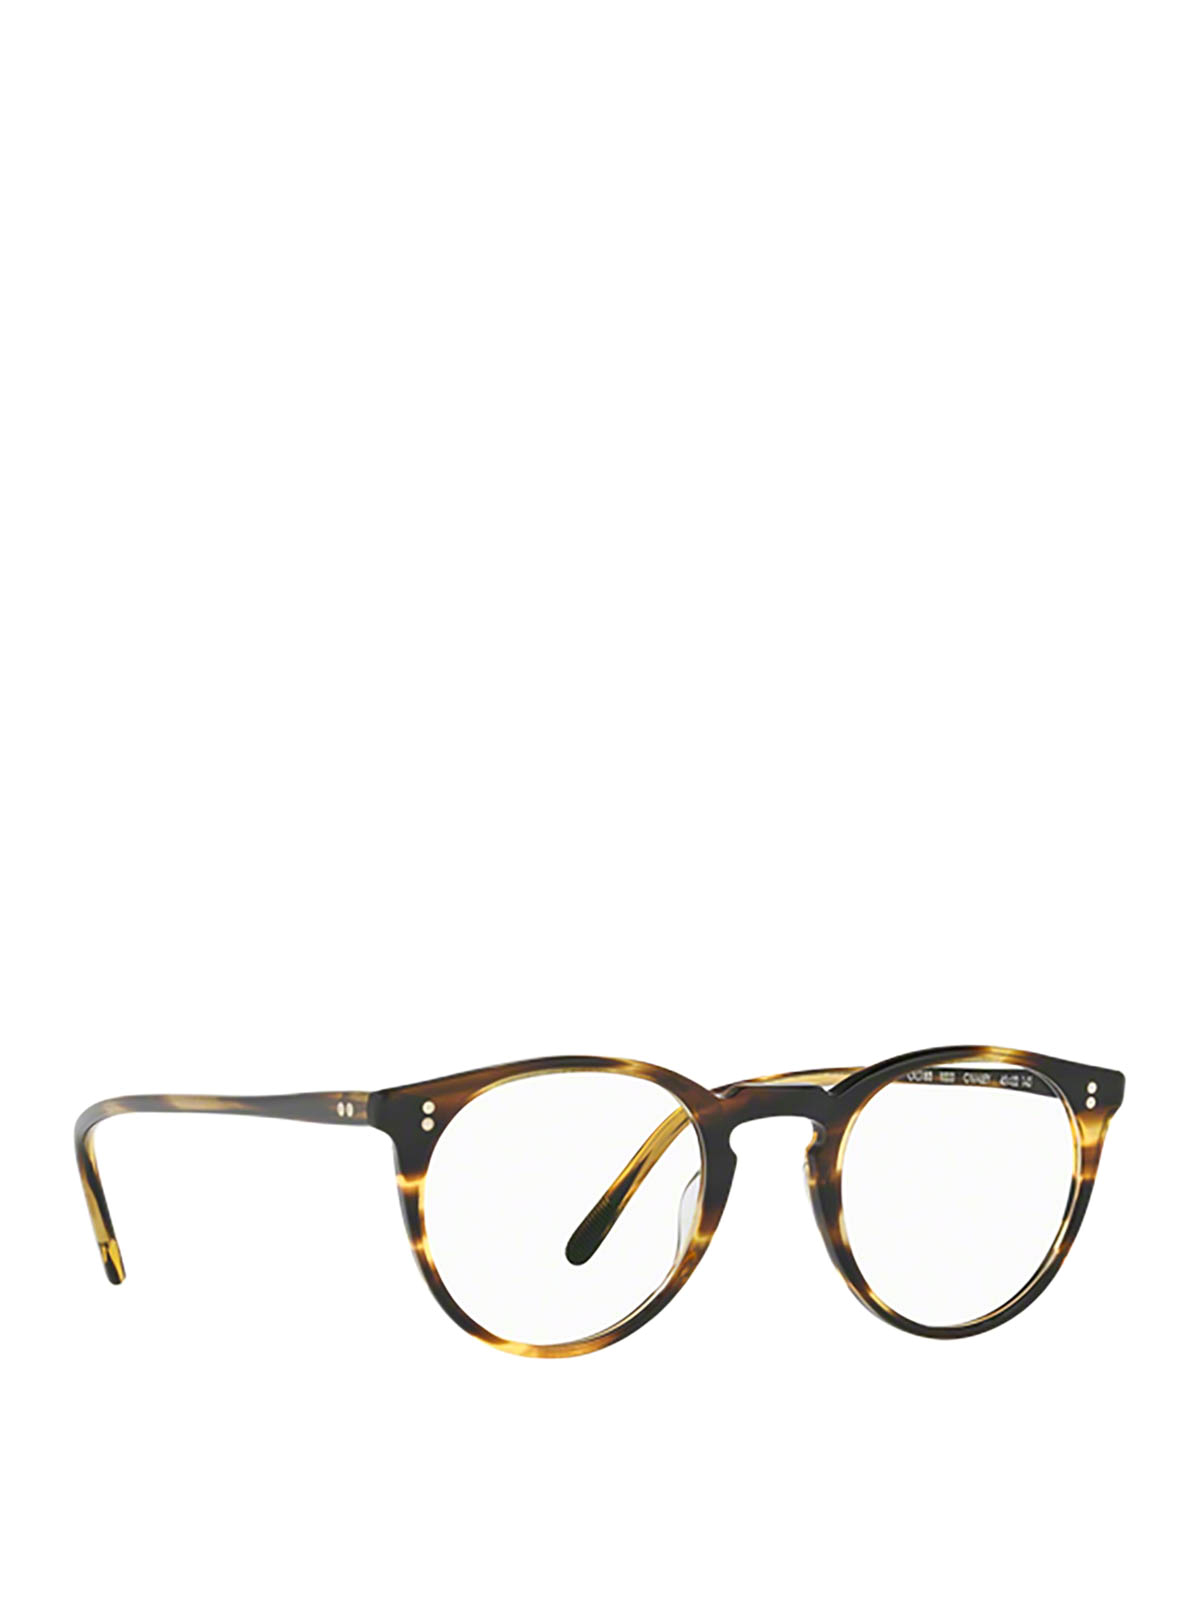 Oliver Peoples O'malley Tortoiseshell Round Eyeglasses In Marrón